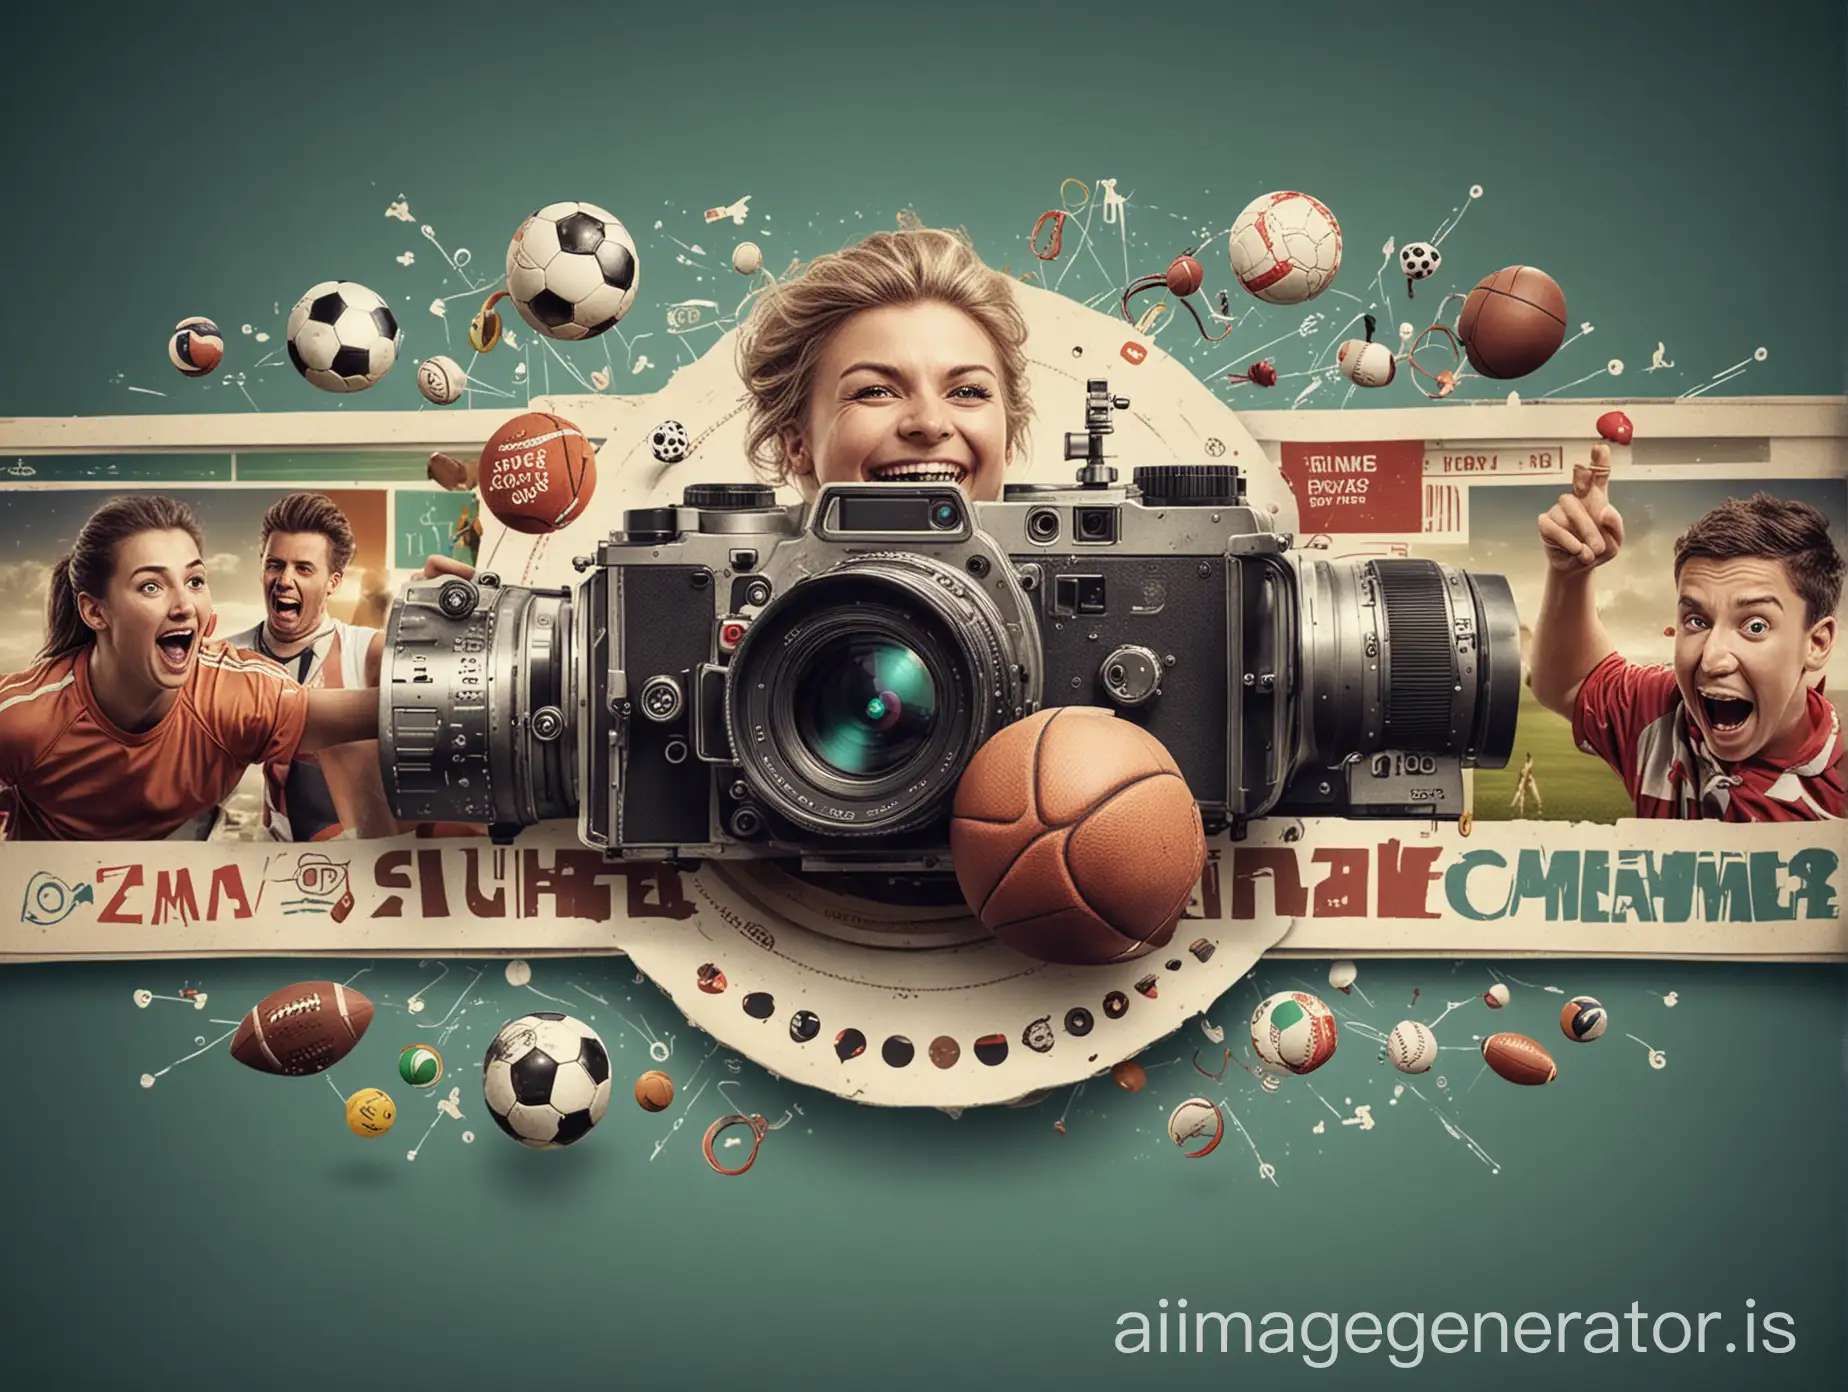 Create a combination of sports and laughter and cinema and science and camera symbols into one image to create an advertising banner